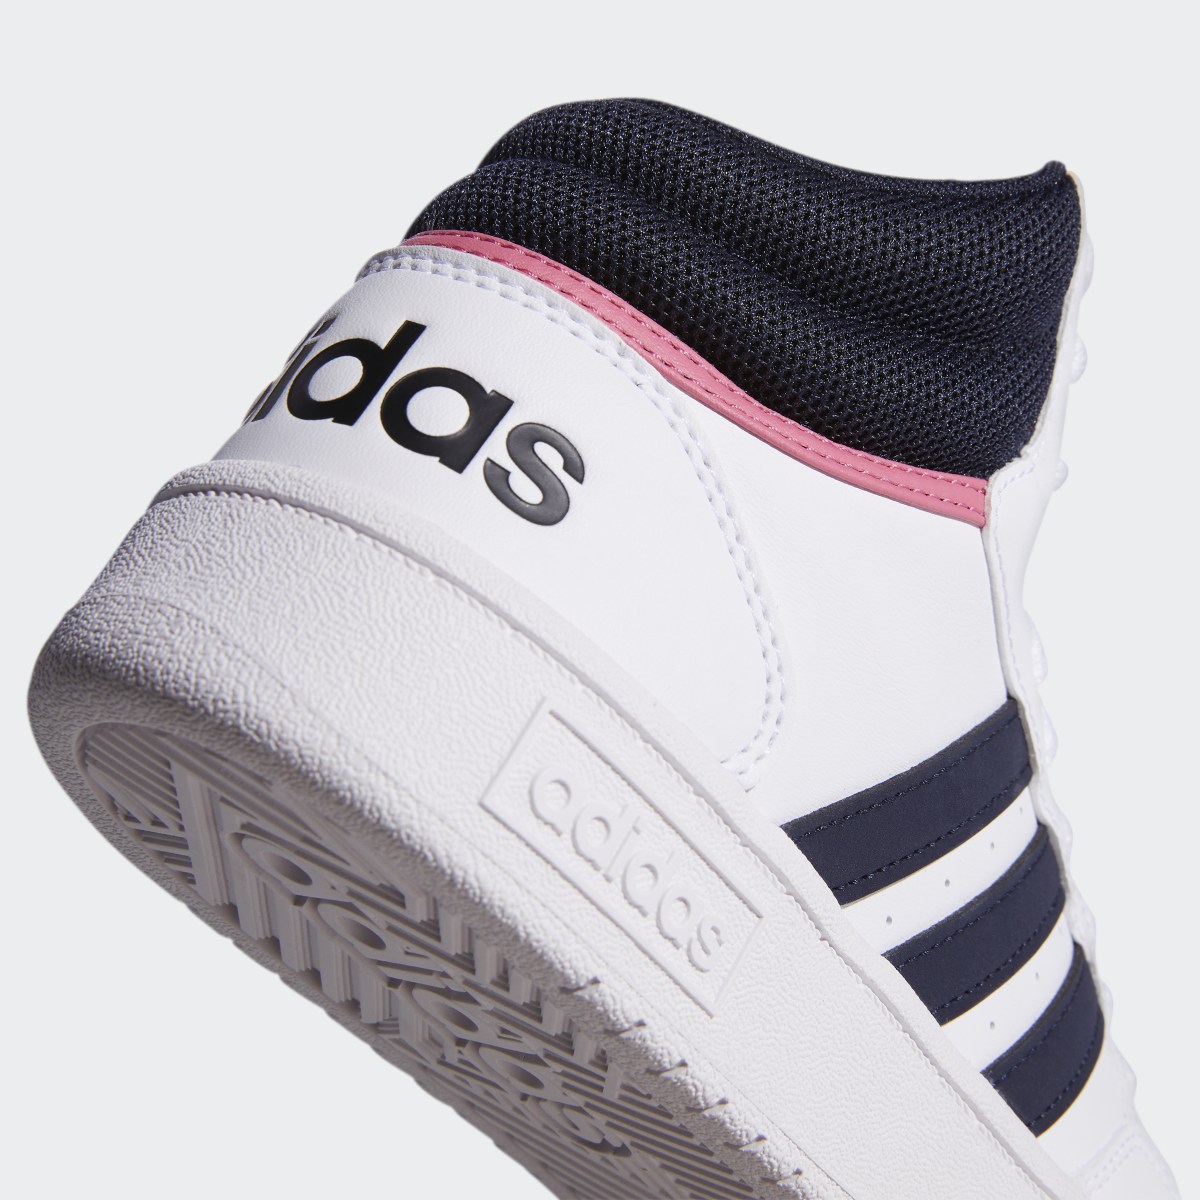 Adidas Hoops 3.0 Mid Classic Shoes. 9